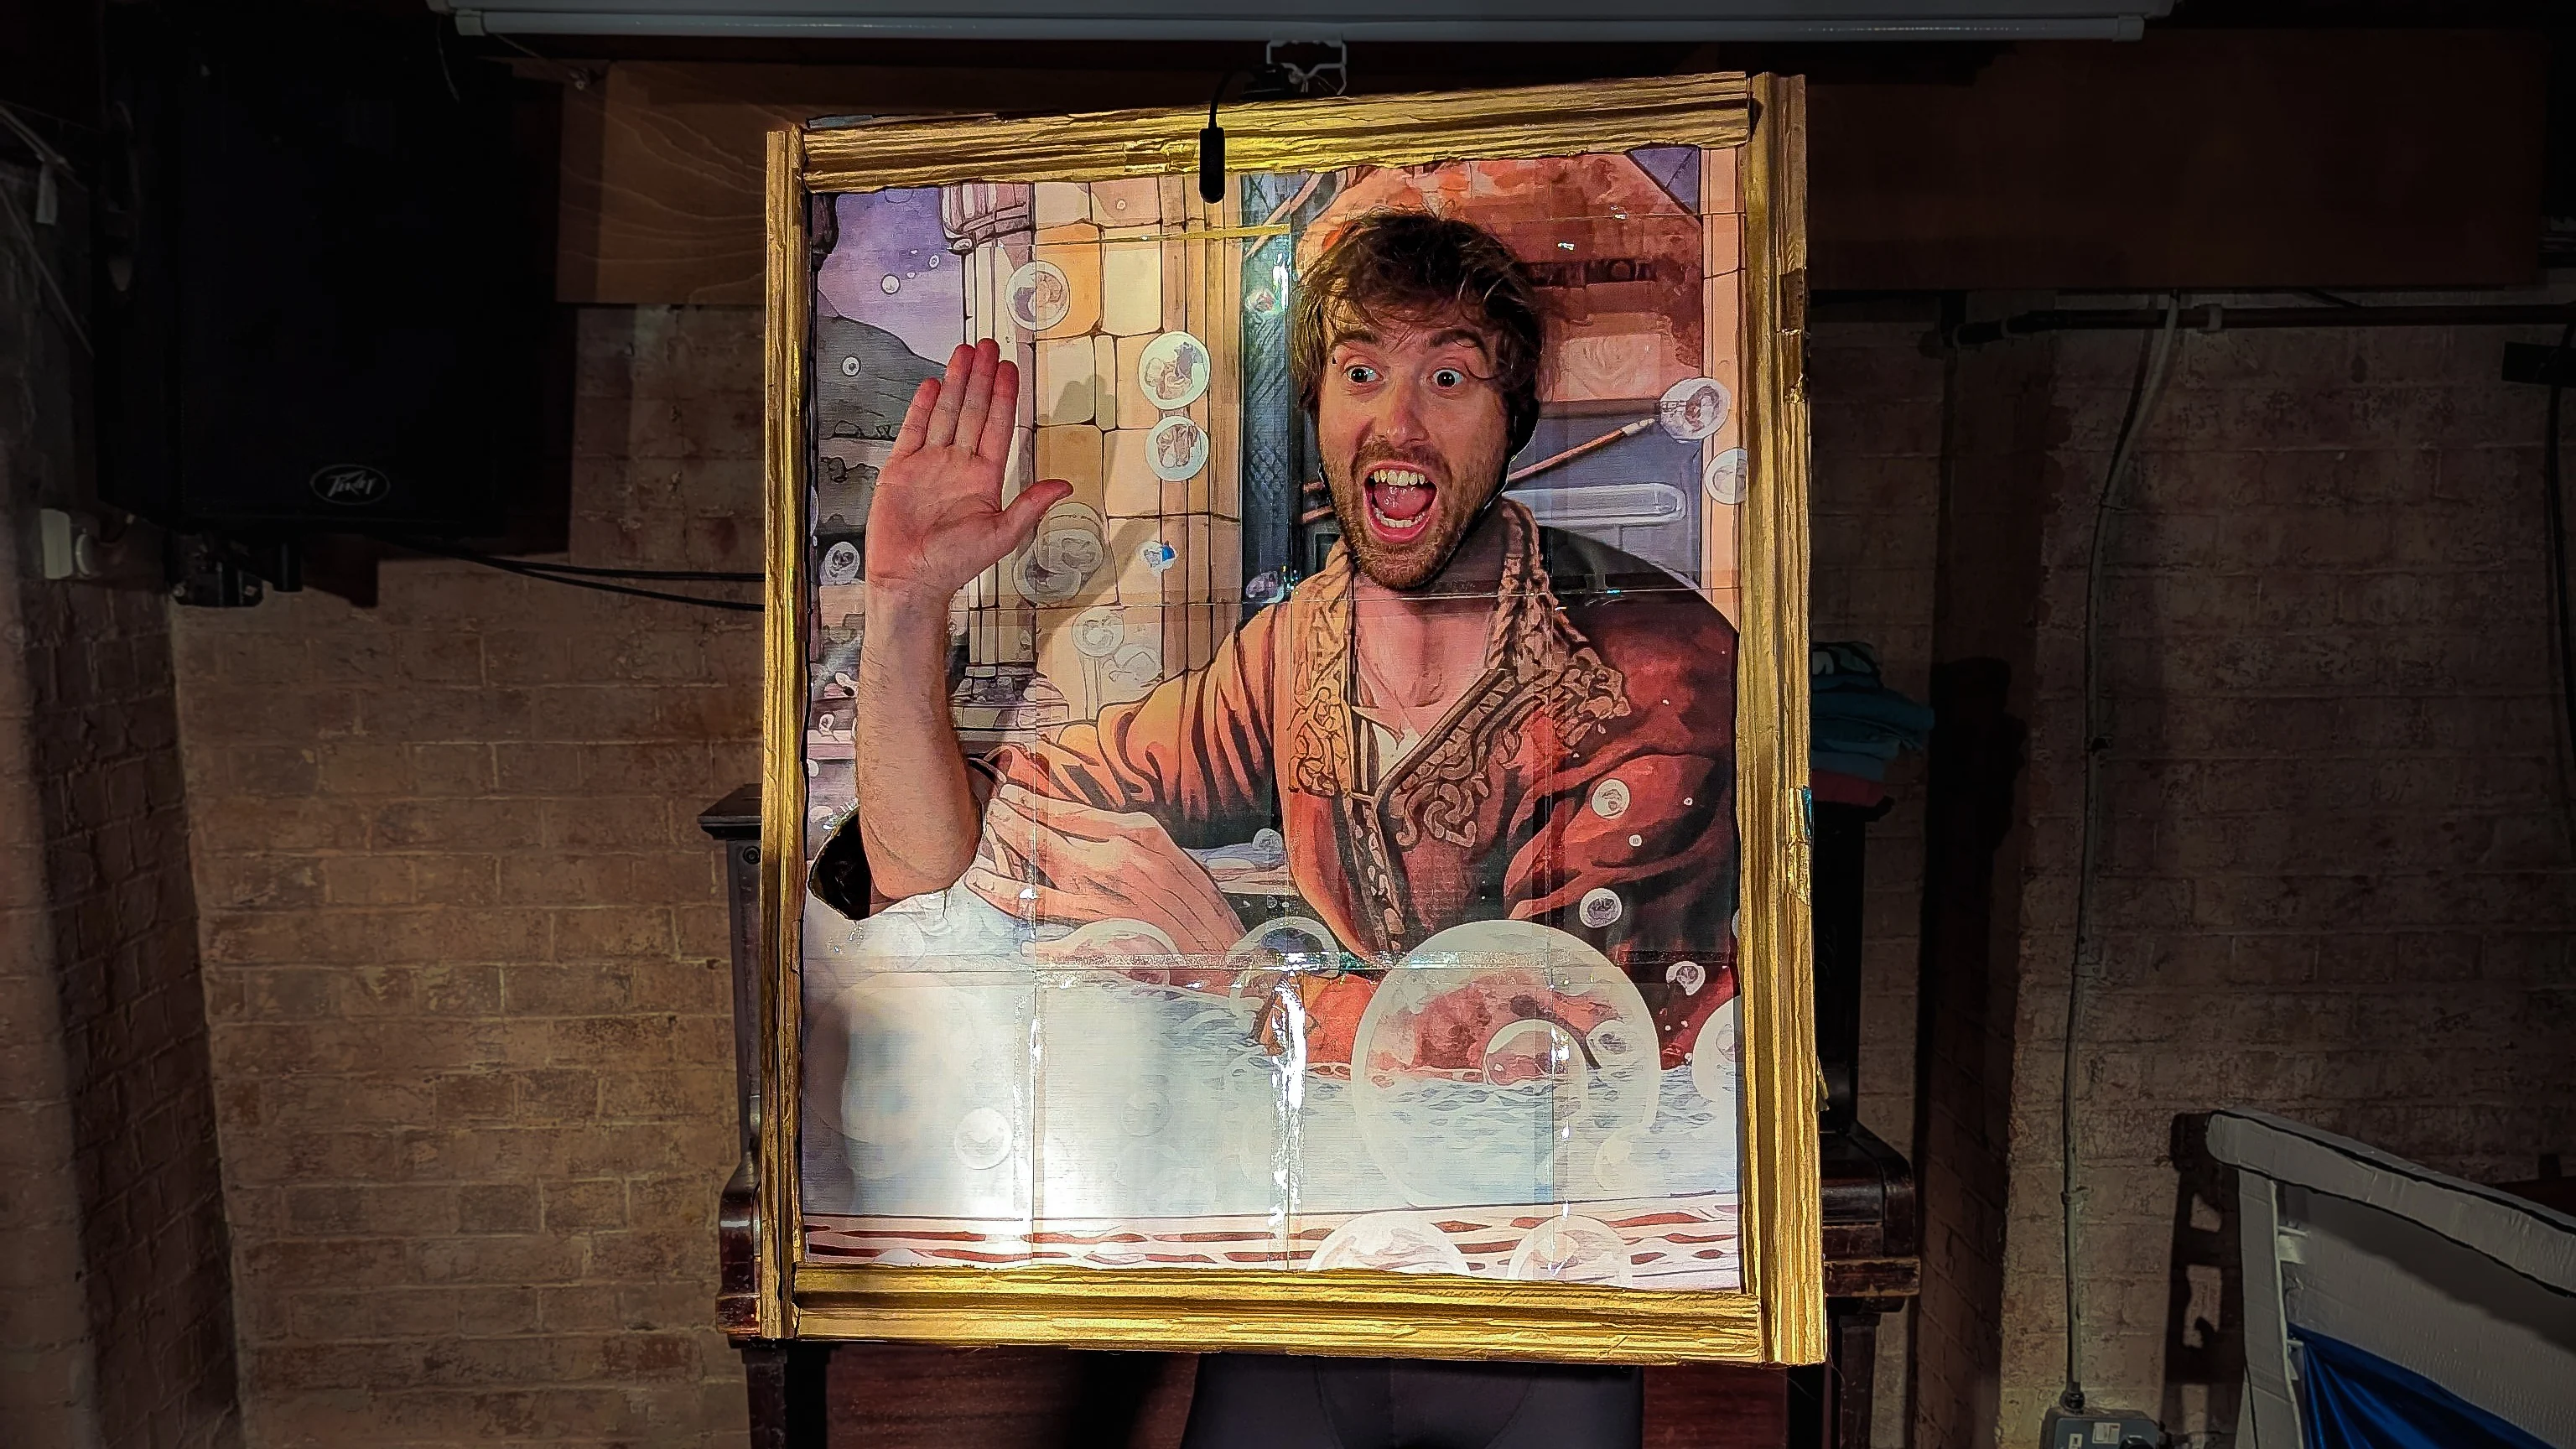 Charlie Jackson is wearing a portrait picture frame as a costume. The portrait is of a man taking a bath at some point in history. Charlie's head and right arm are visible via cut out sections of the portrait.